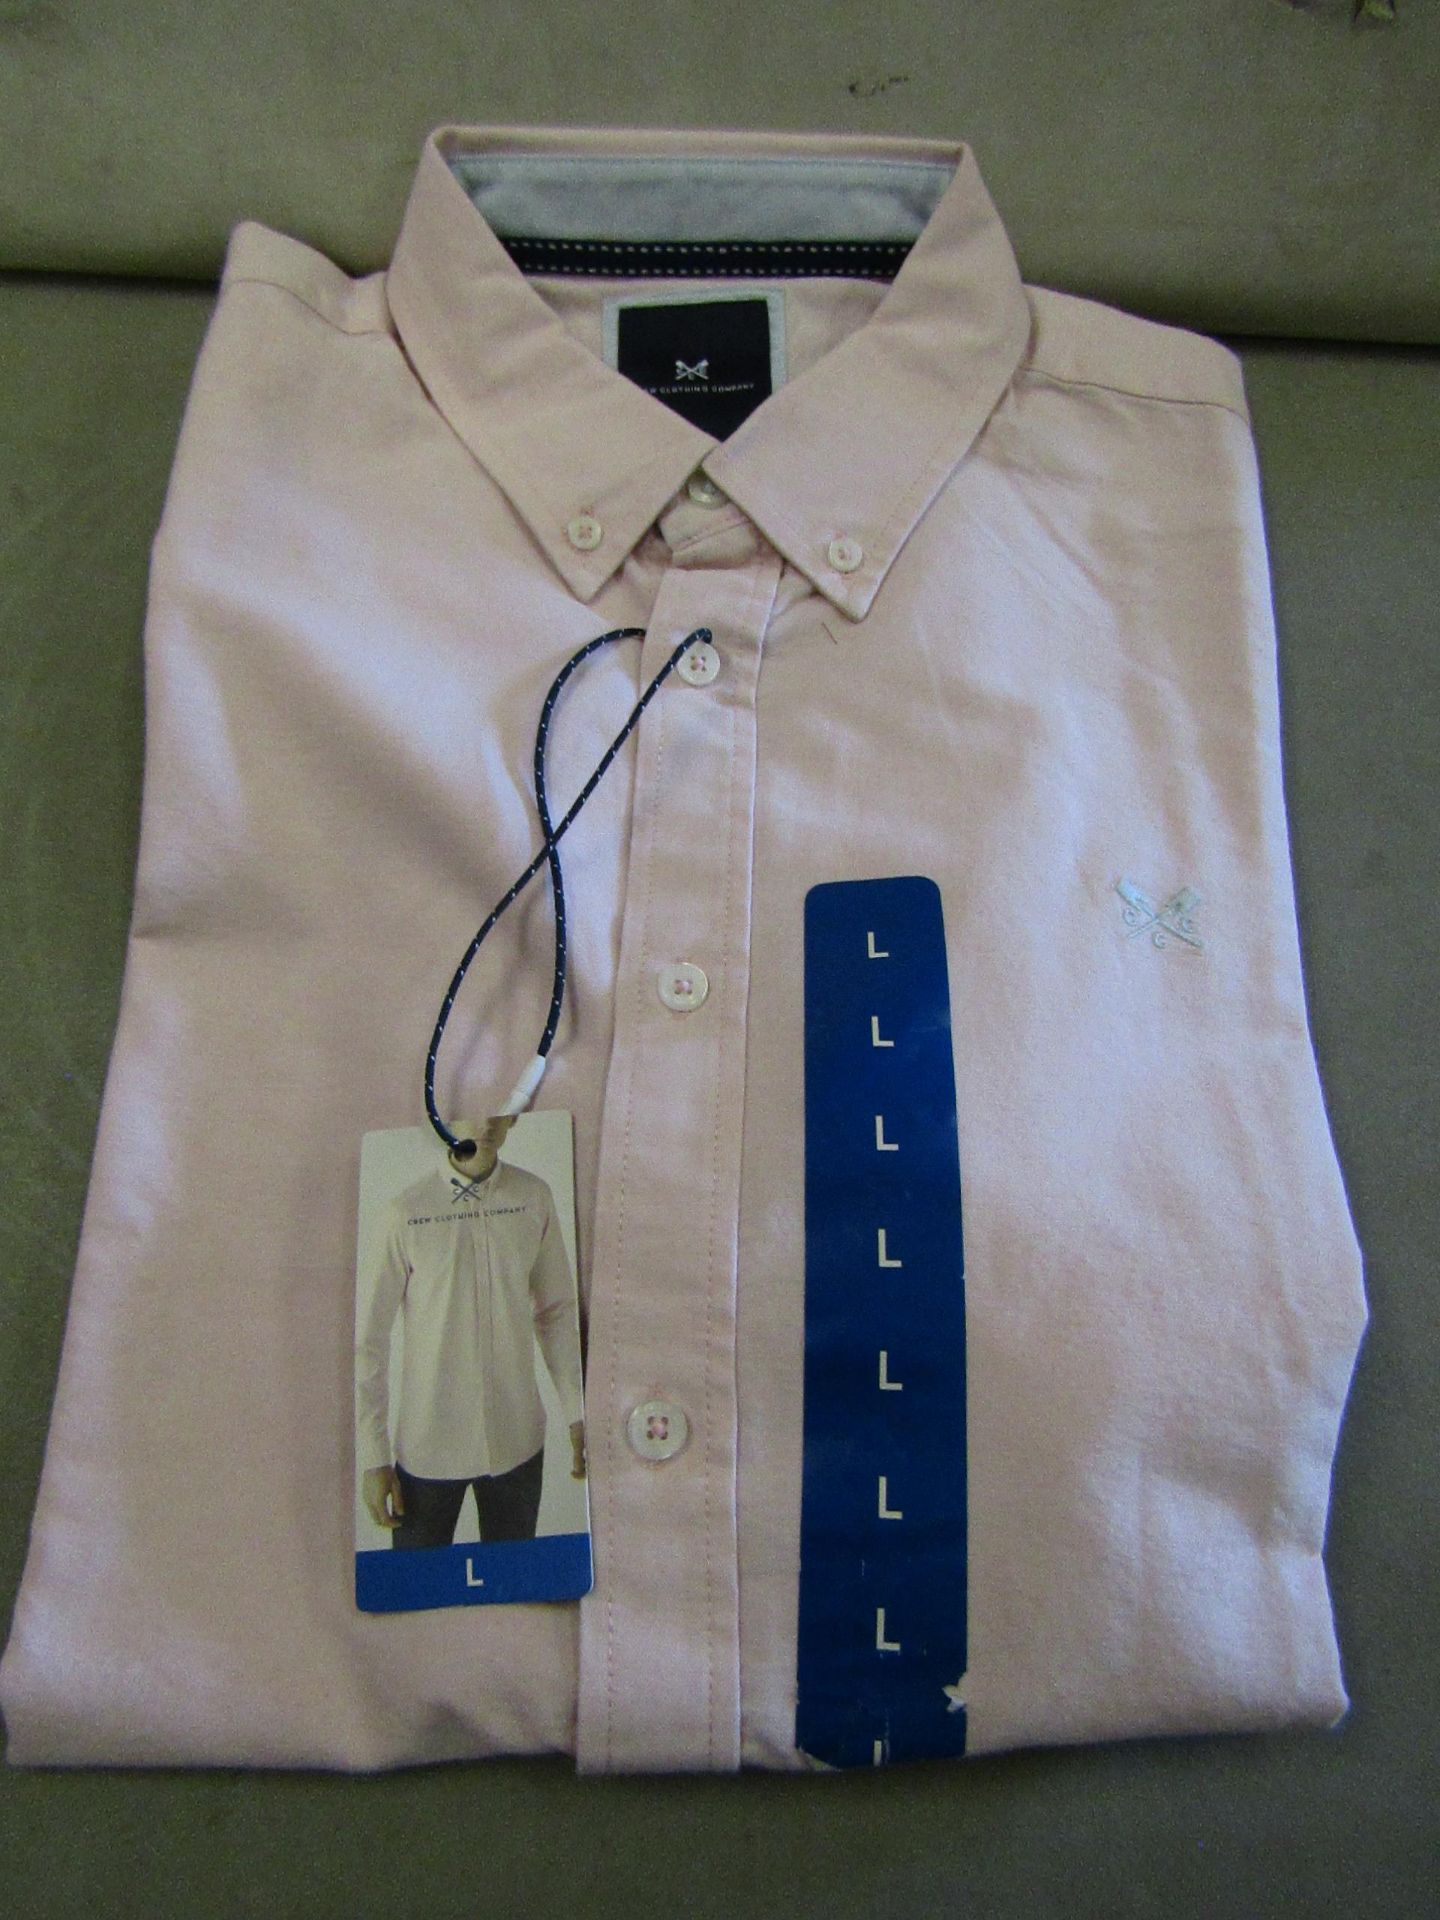 Crew Clothing Company, Mens Oxford Slim Fit Shirt Silver/Pink Size L New With Tags